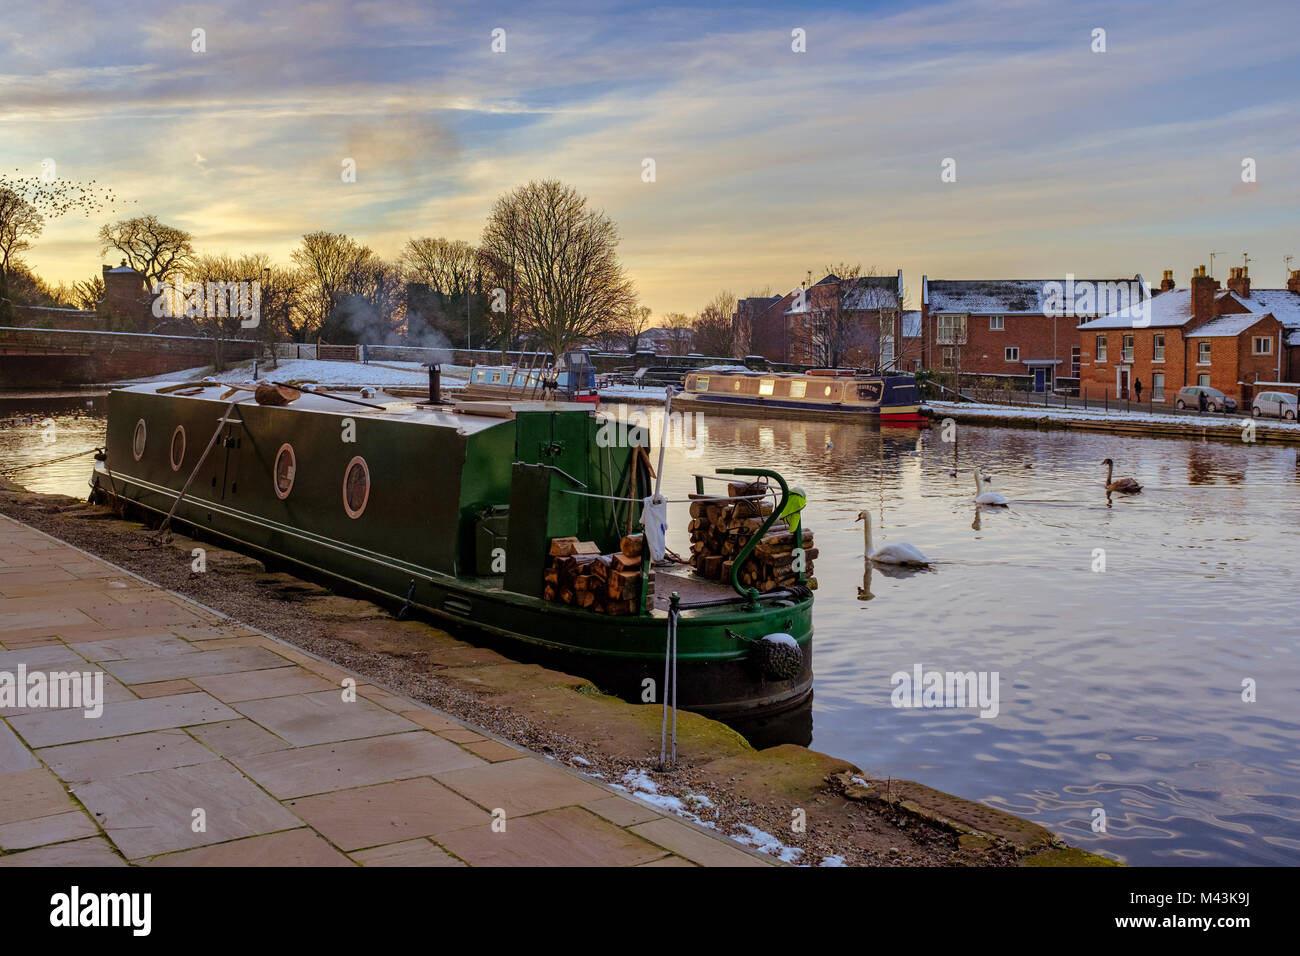 A canal boat moored on the Shropshire Union Canal in Chester, England, UK. Stock Photo